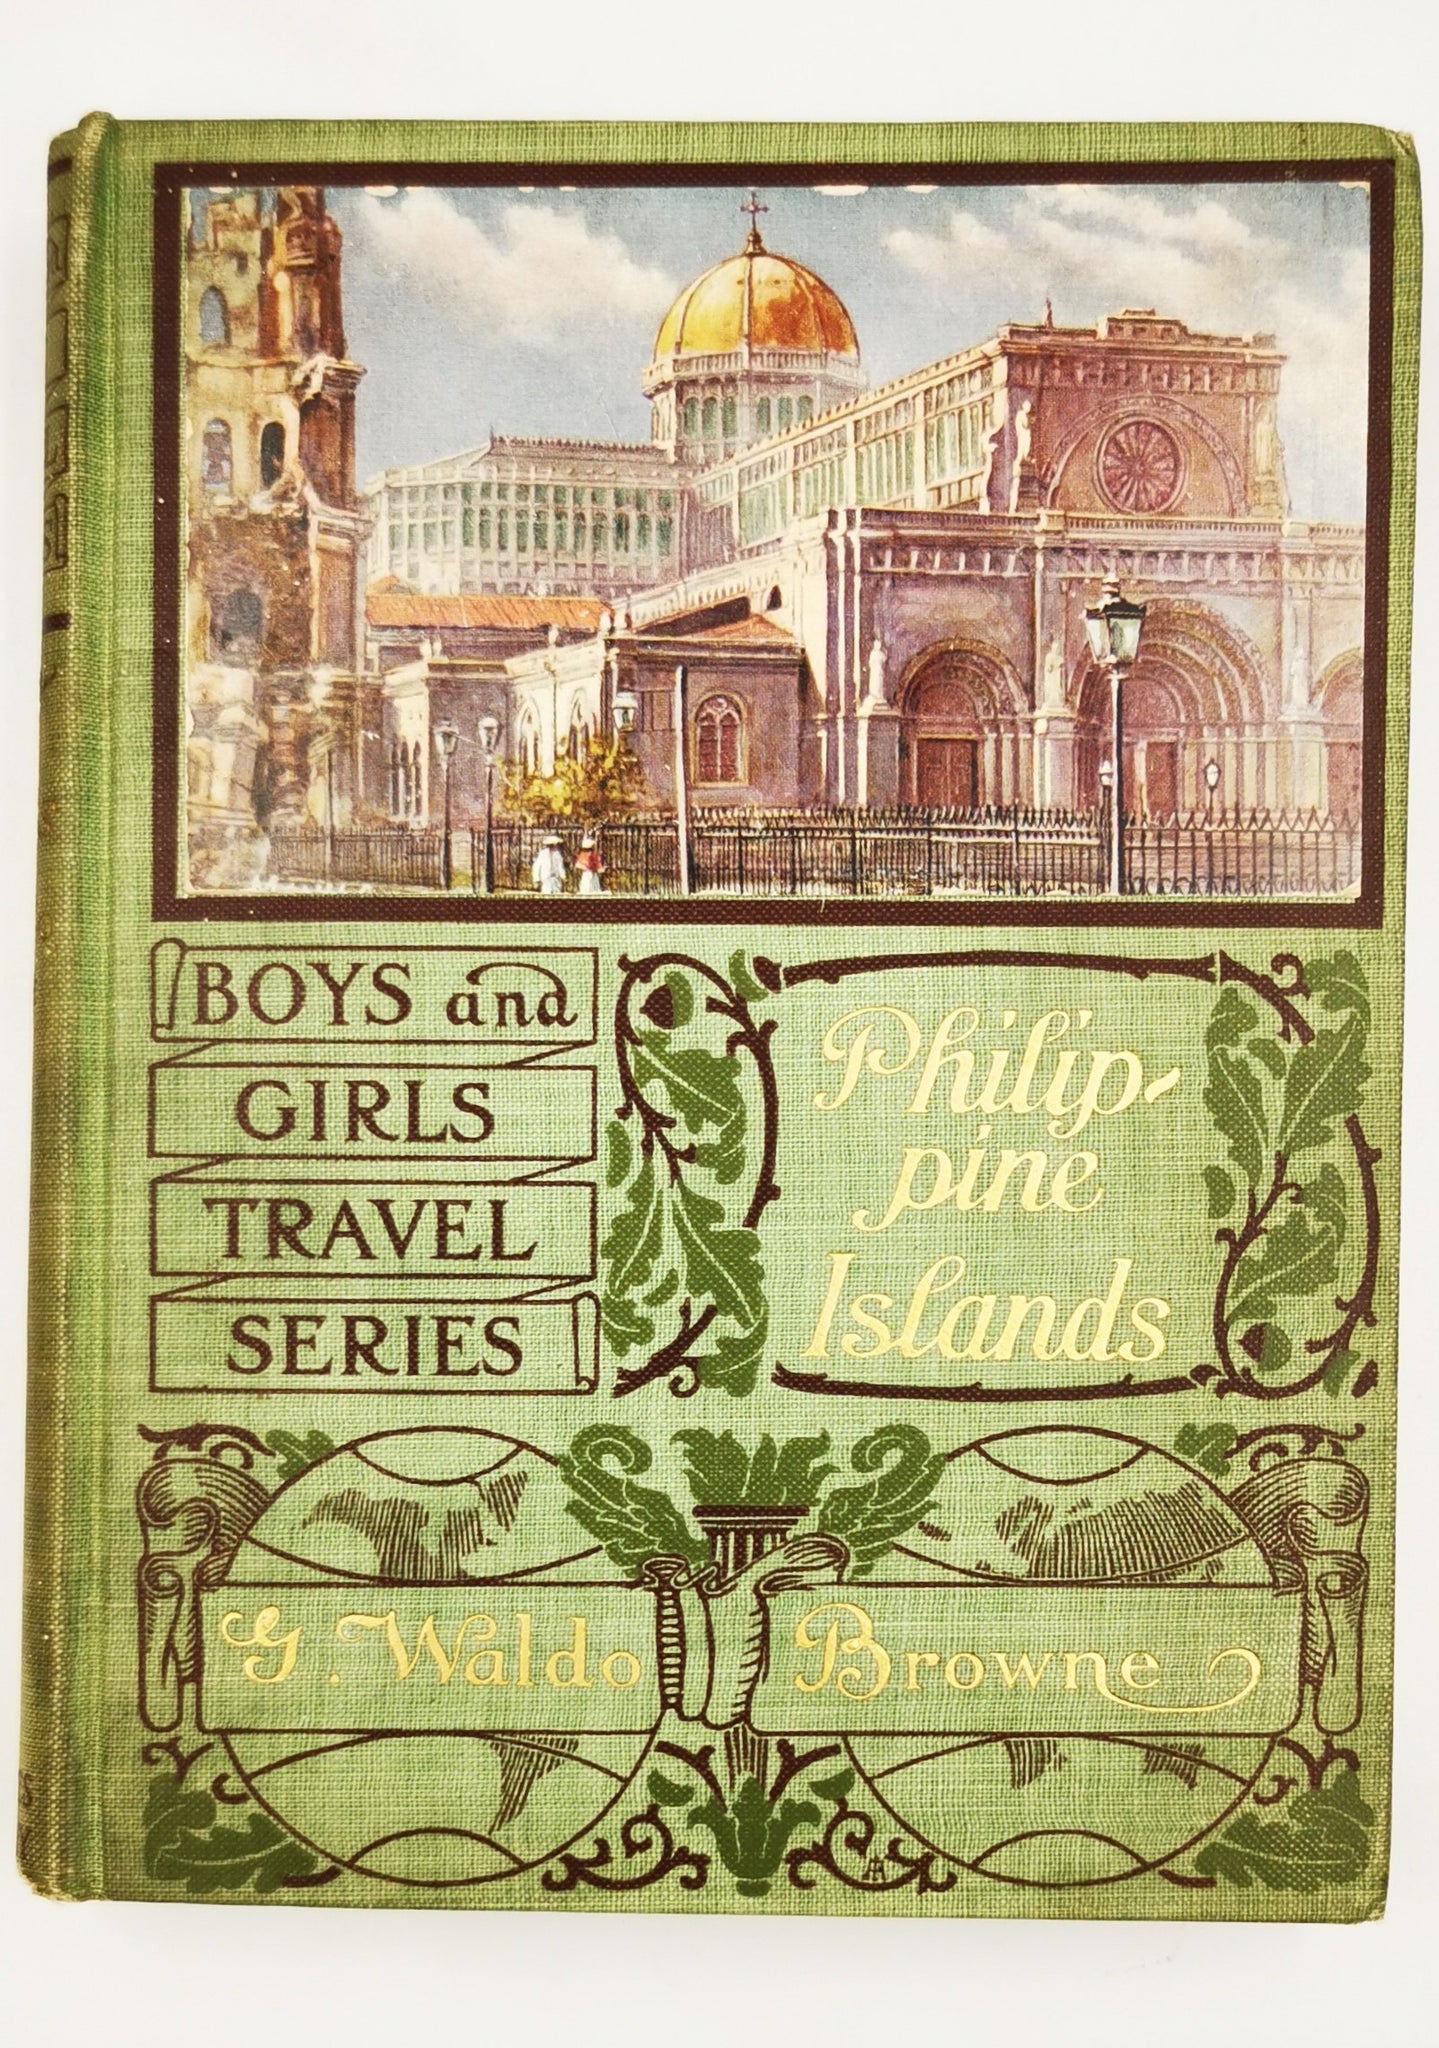 Boys and Girls Travel Series Philippine Islands By G. W. Browne